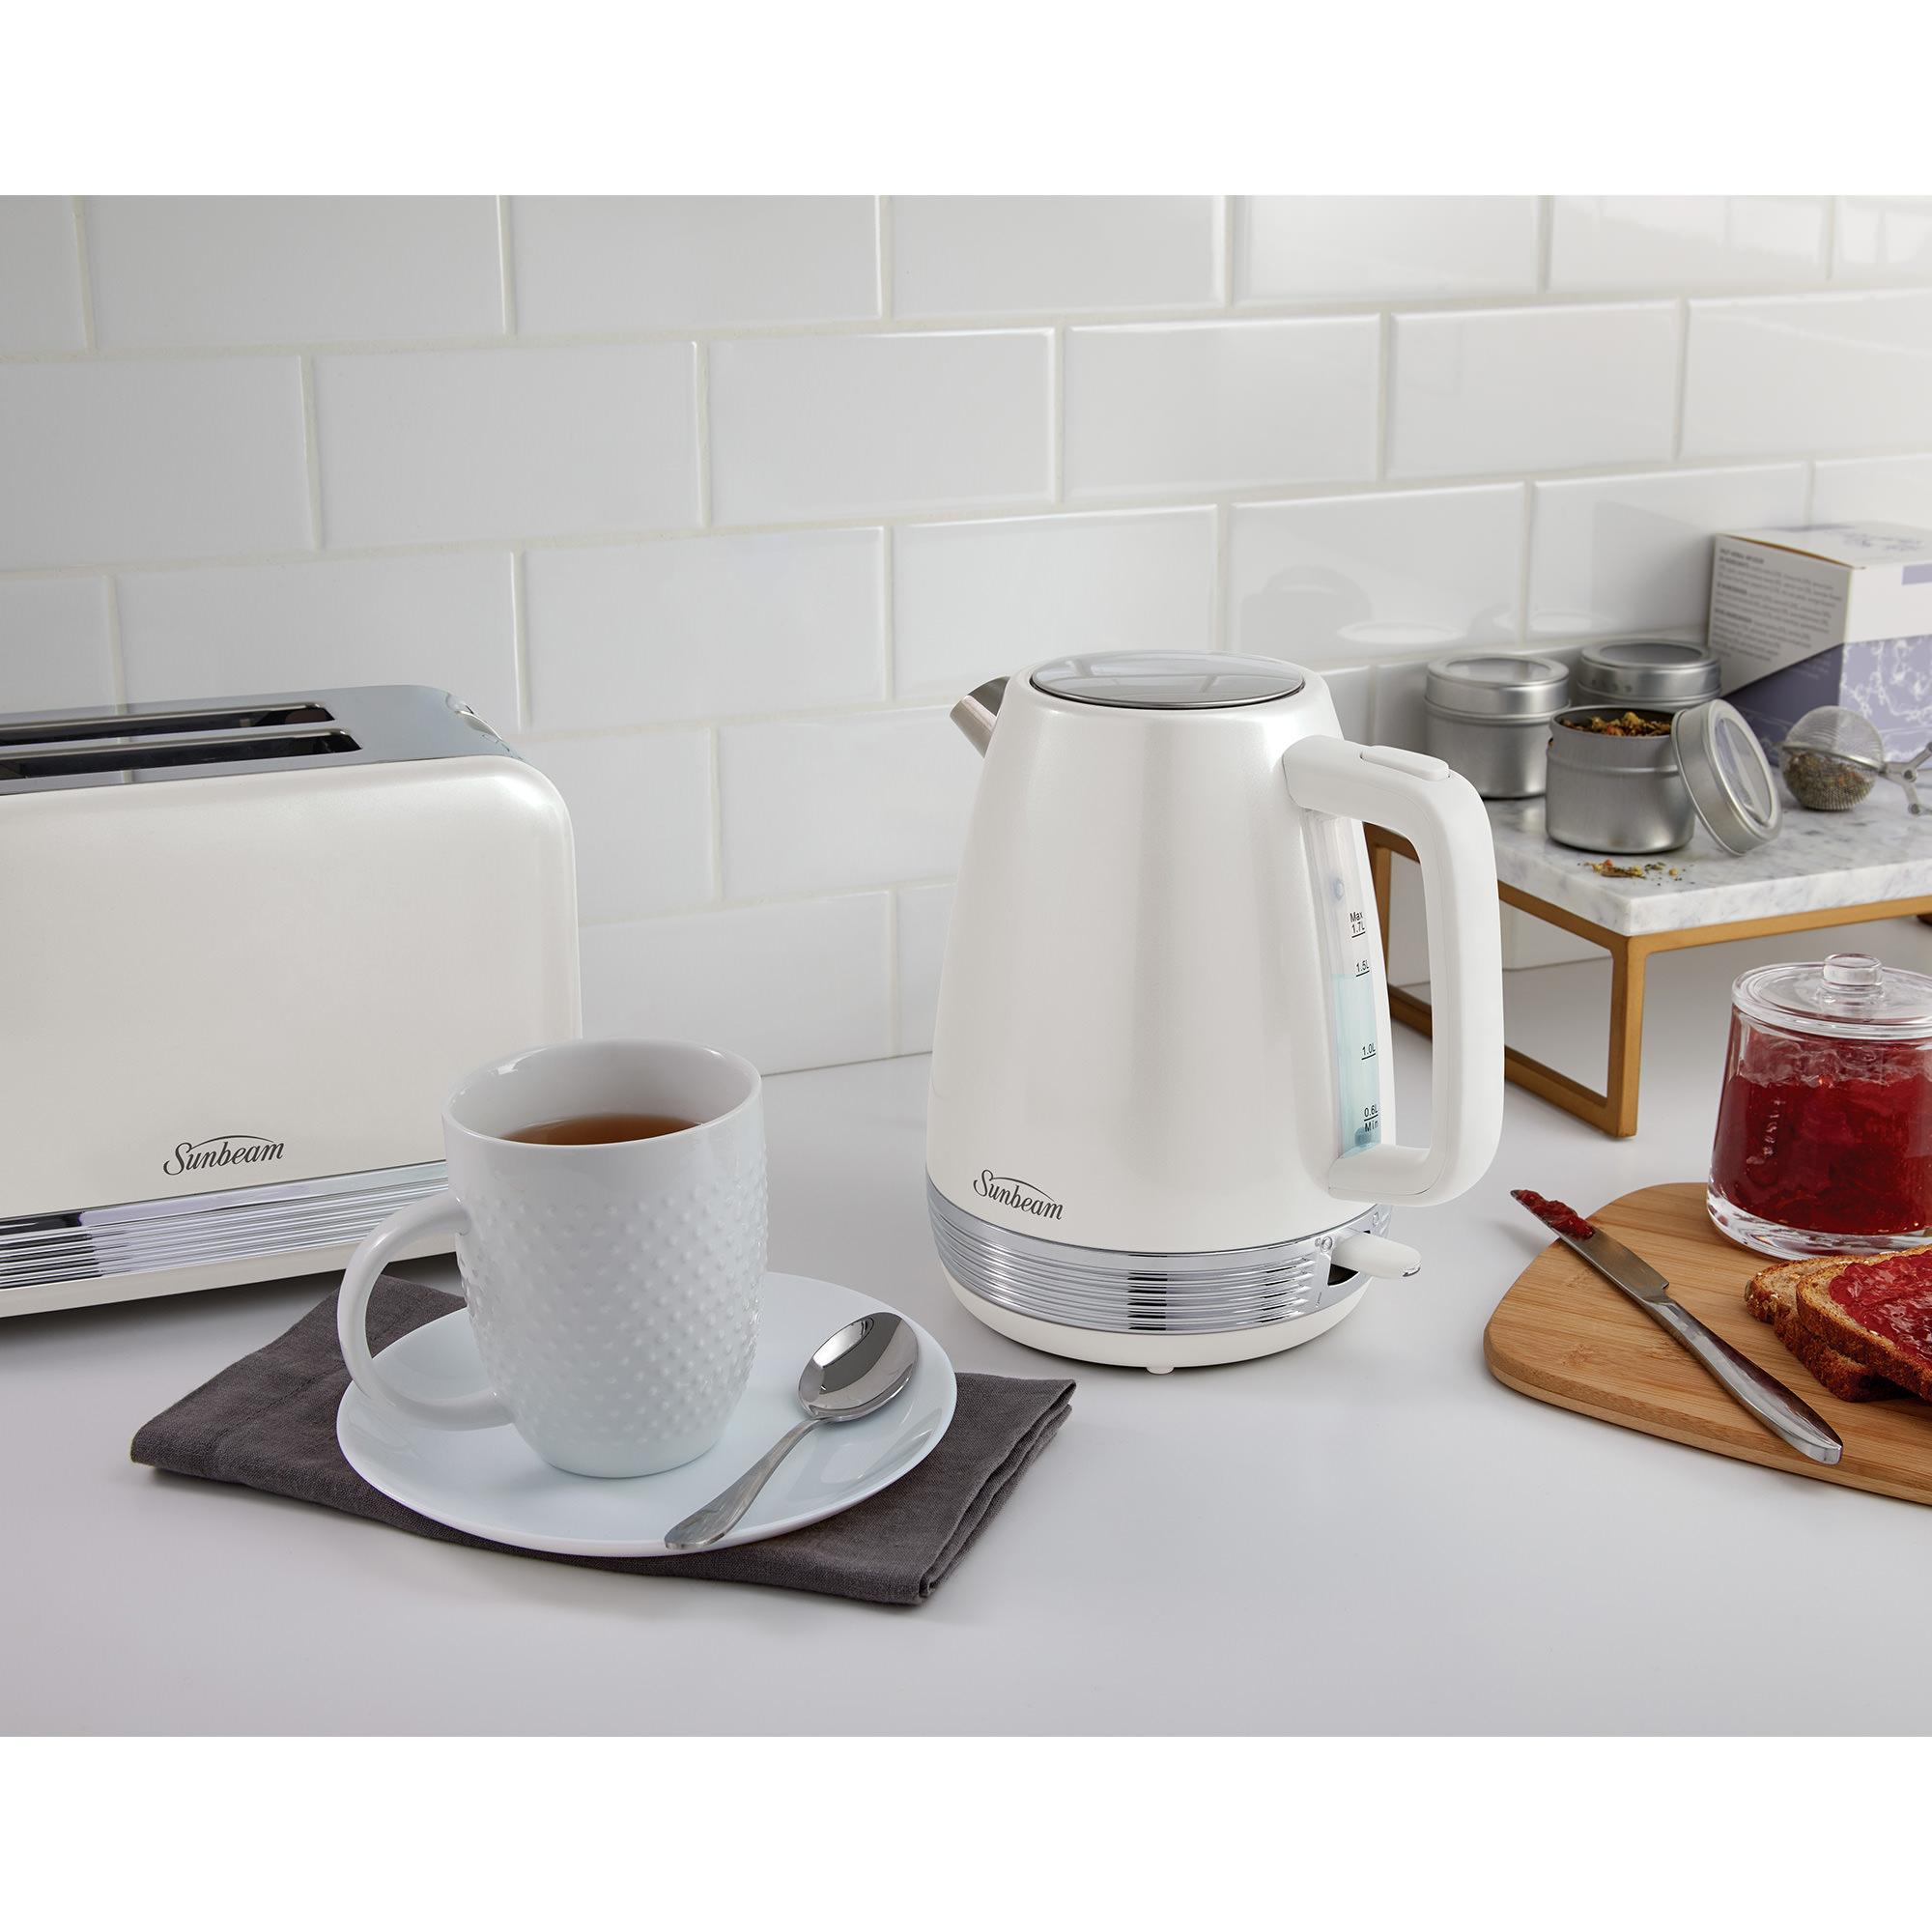 Sunbeam The Chic Collection Breakfast Pack White & Brushed Stainless Image 4